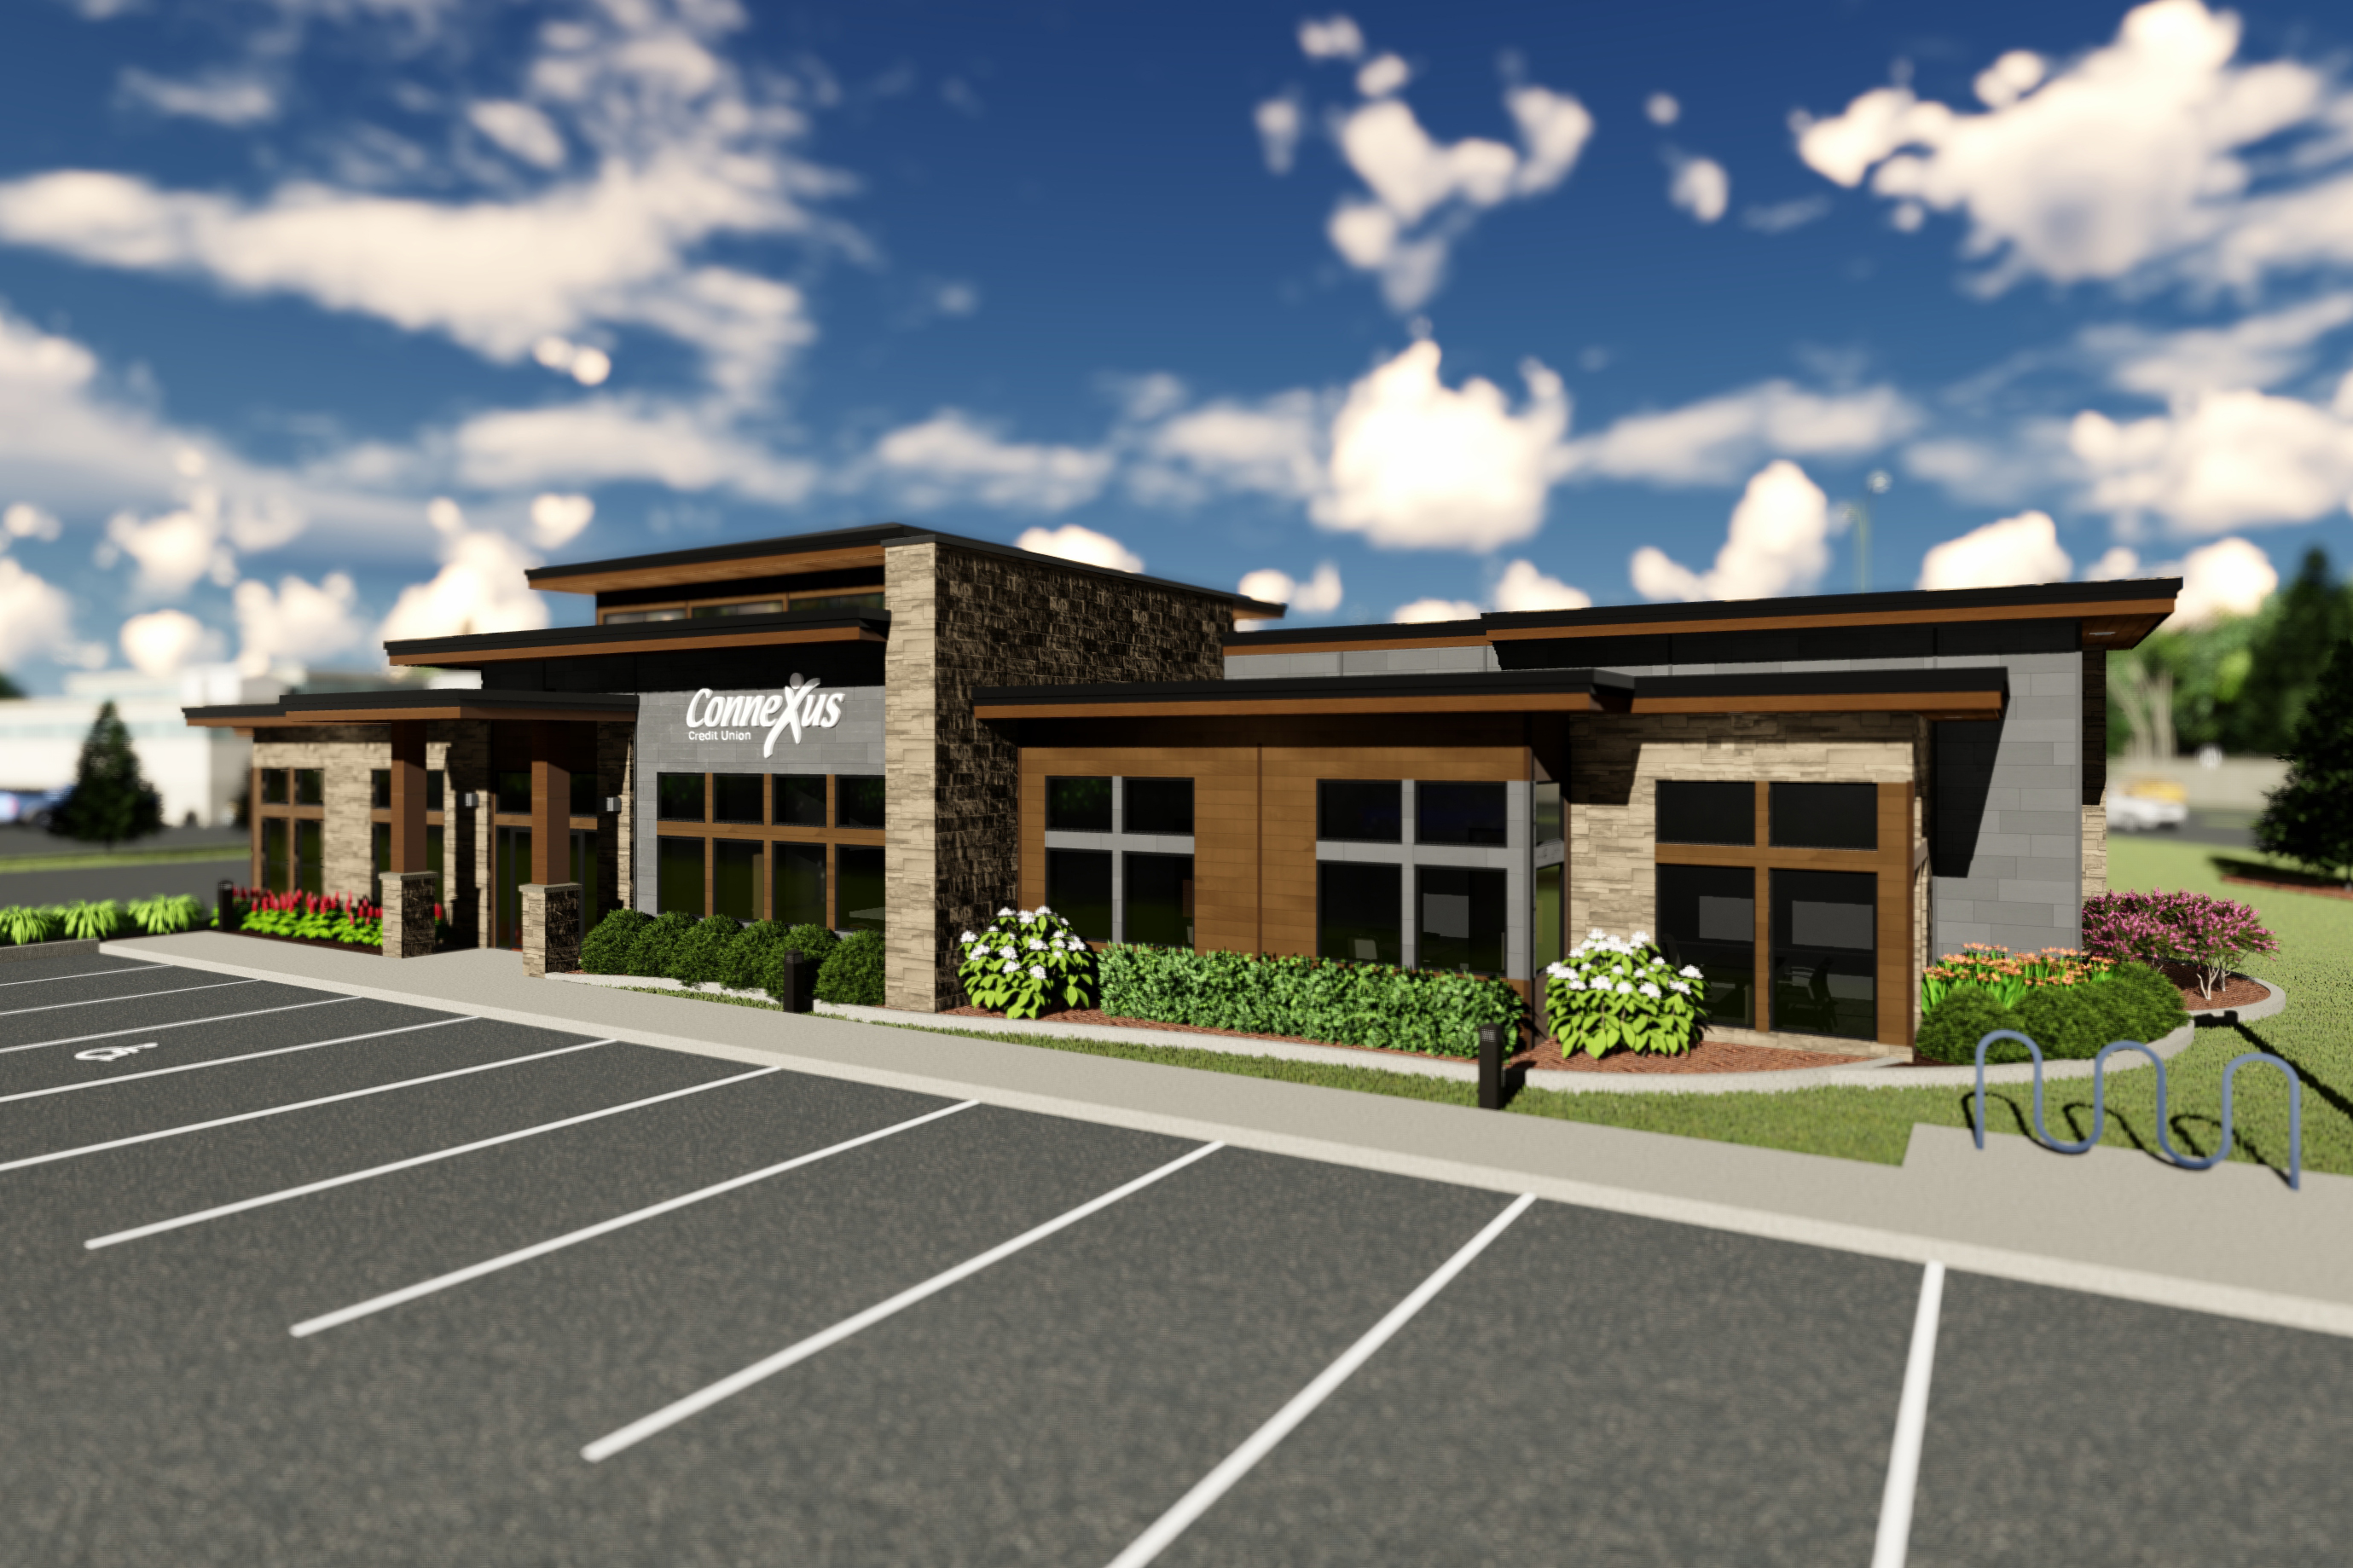 New Signature Branch for Connexus Credit Union is Underway in Rib Mountain